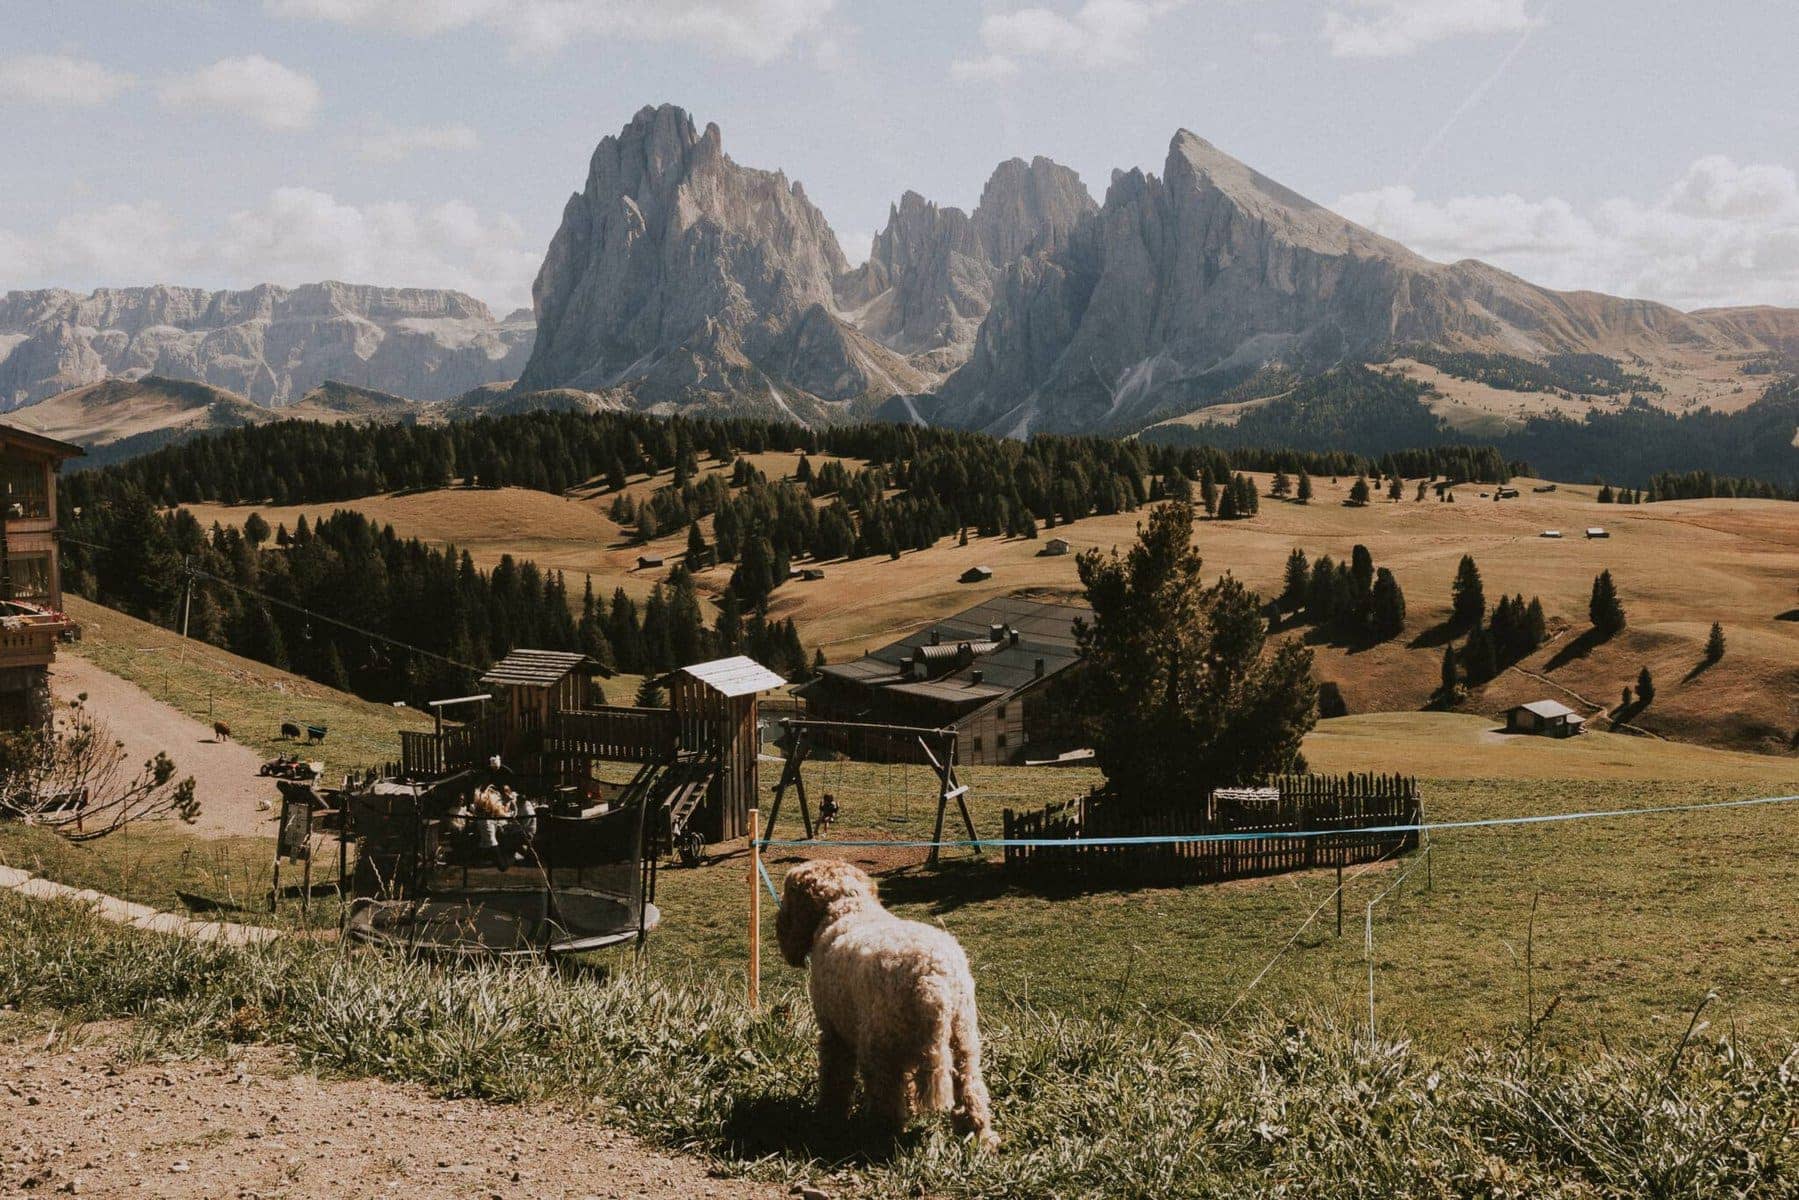 The most beautiful meadow in South Tyrol: the Seiser Alm (Alpe di Siusi). The photo shows a cockapoo dog and behind him the beautiful peaks of the Tyrolean Alps.